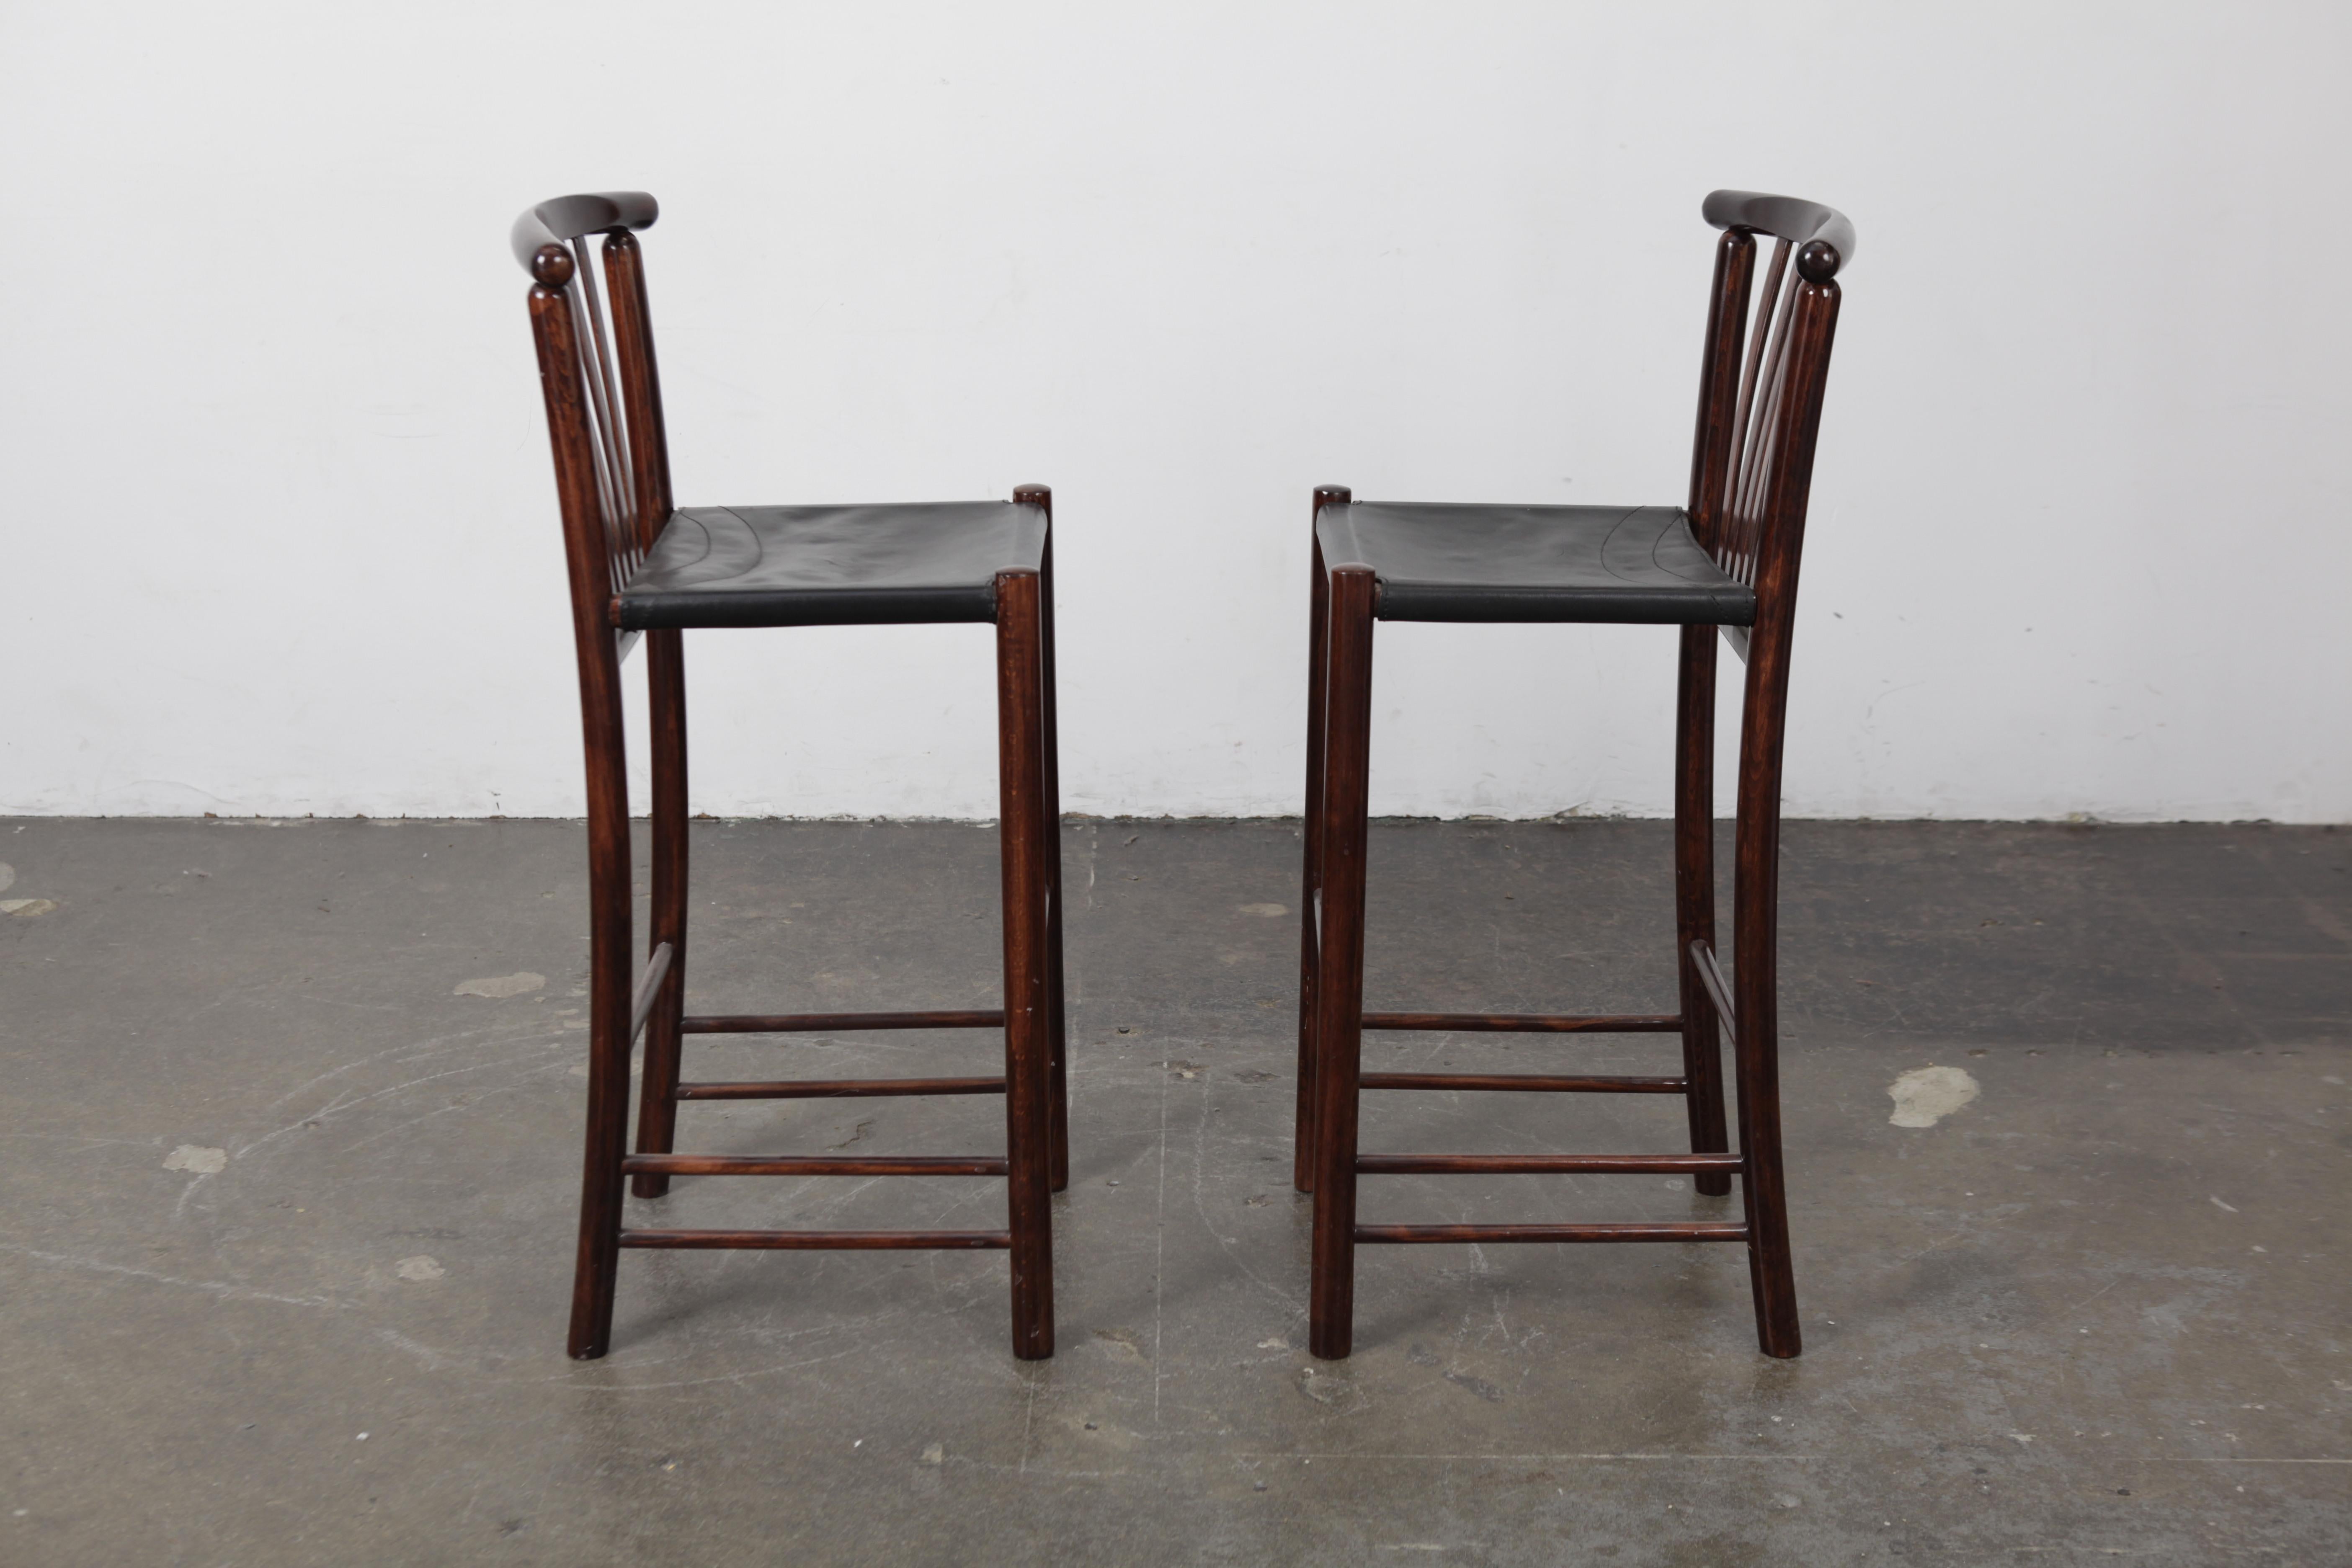 Pair of tall solid wood spindle back bar stools with original black leather seats, Brazil, 1960s. Original black leather slings. These are bar height.